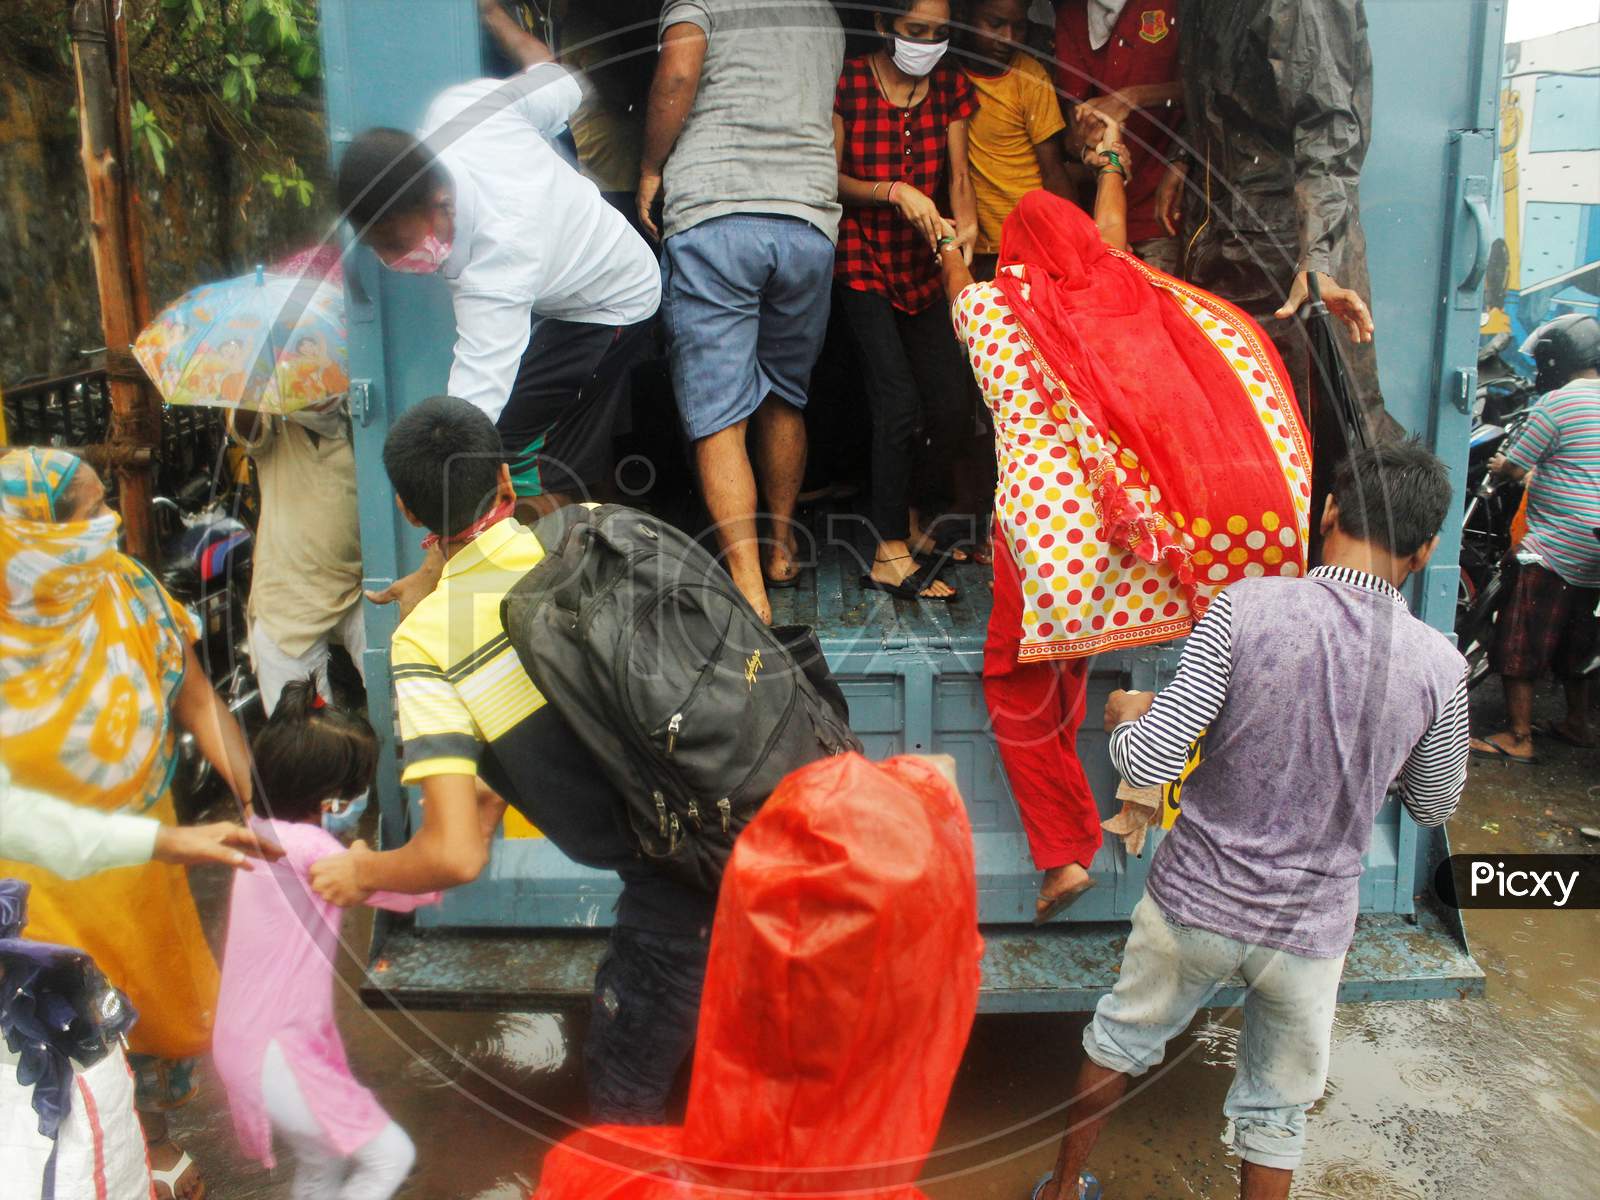 People scramble to enter a truck during an evacuation of a slum off the coast of the Arabian sea in Mumbai, India as cyclone Nisarga makes its landfall, on the outskirts of the city, June, 3, 2020.